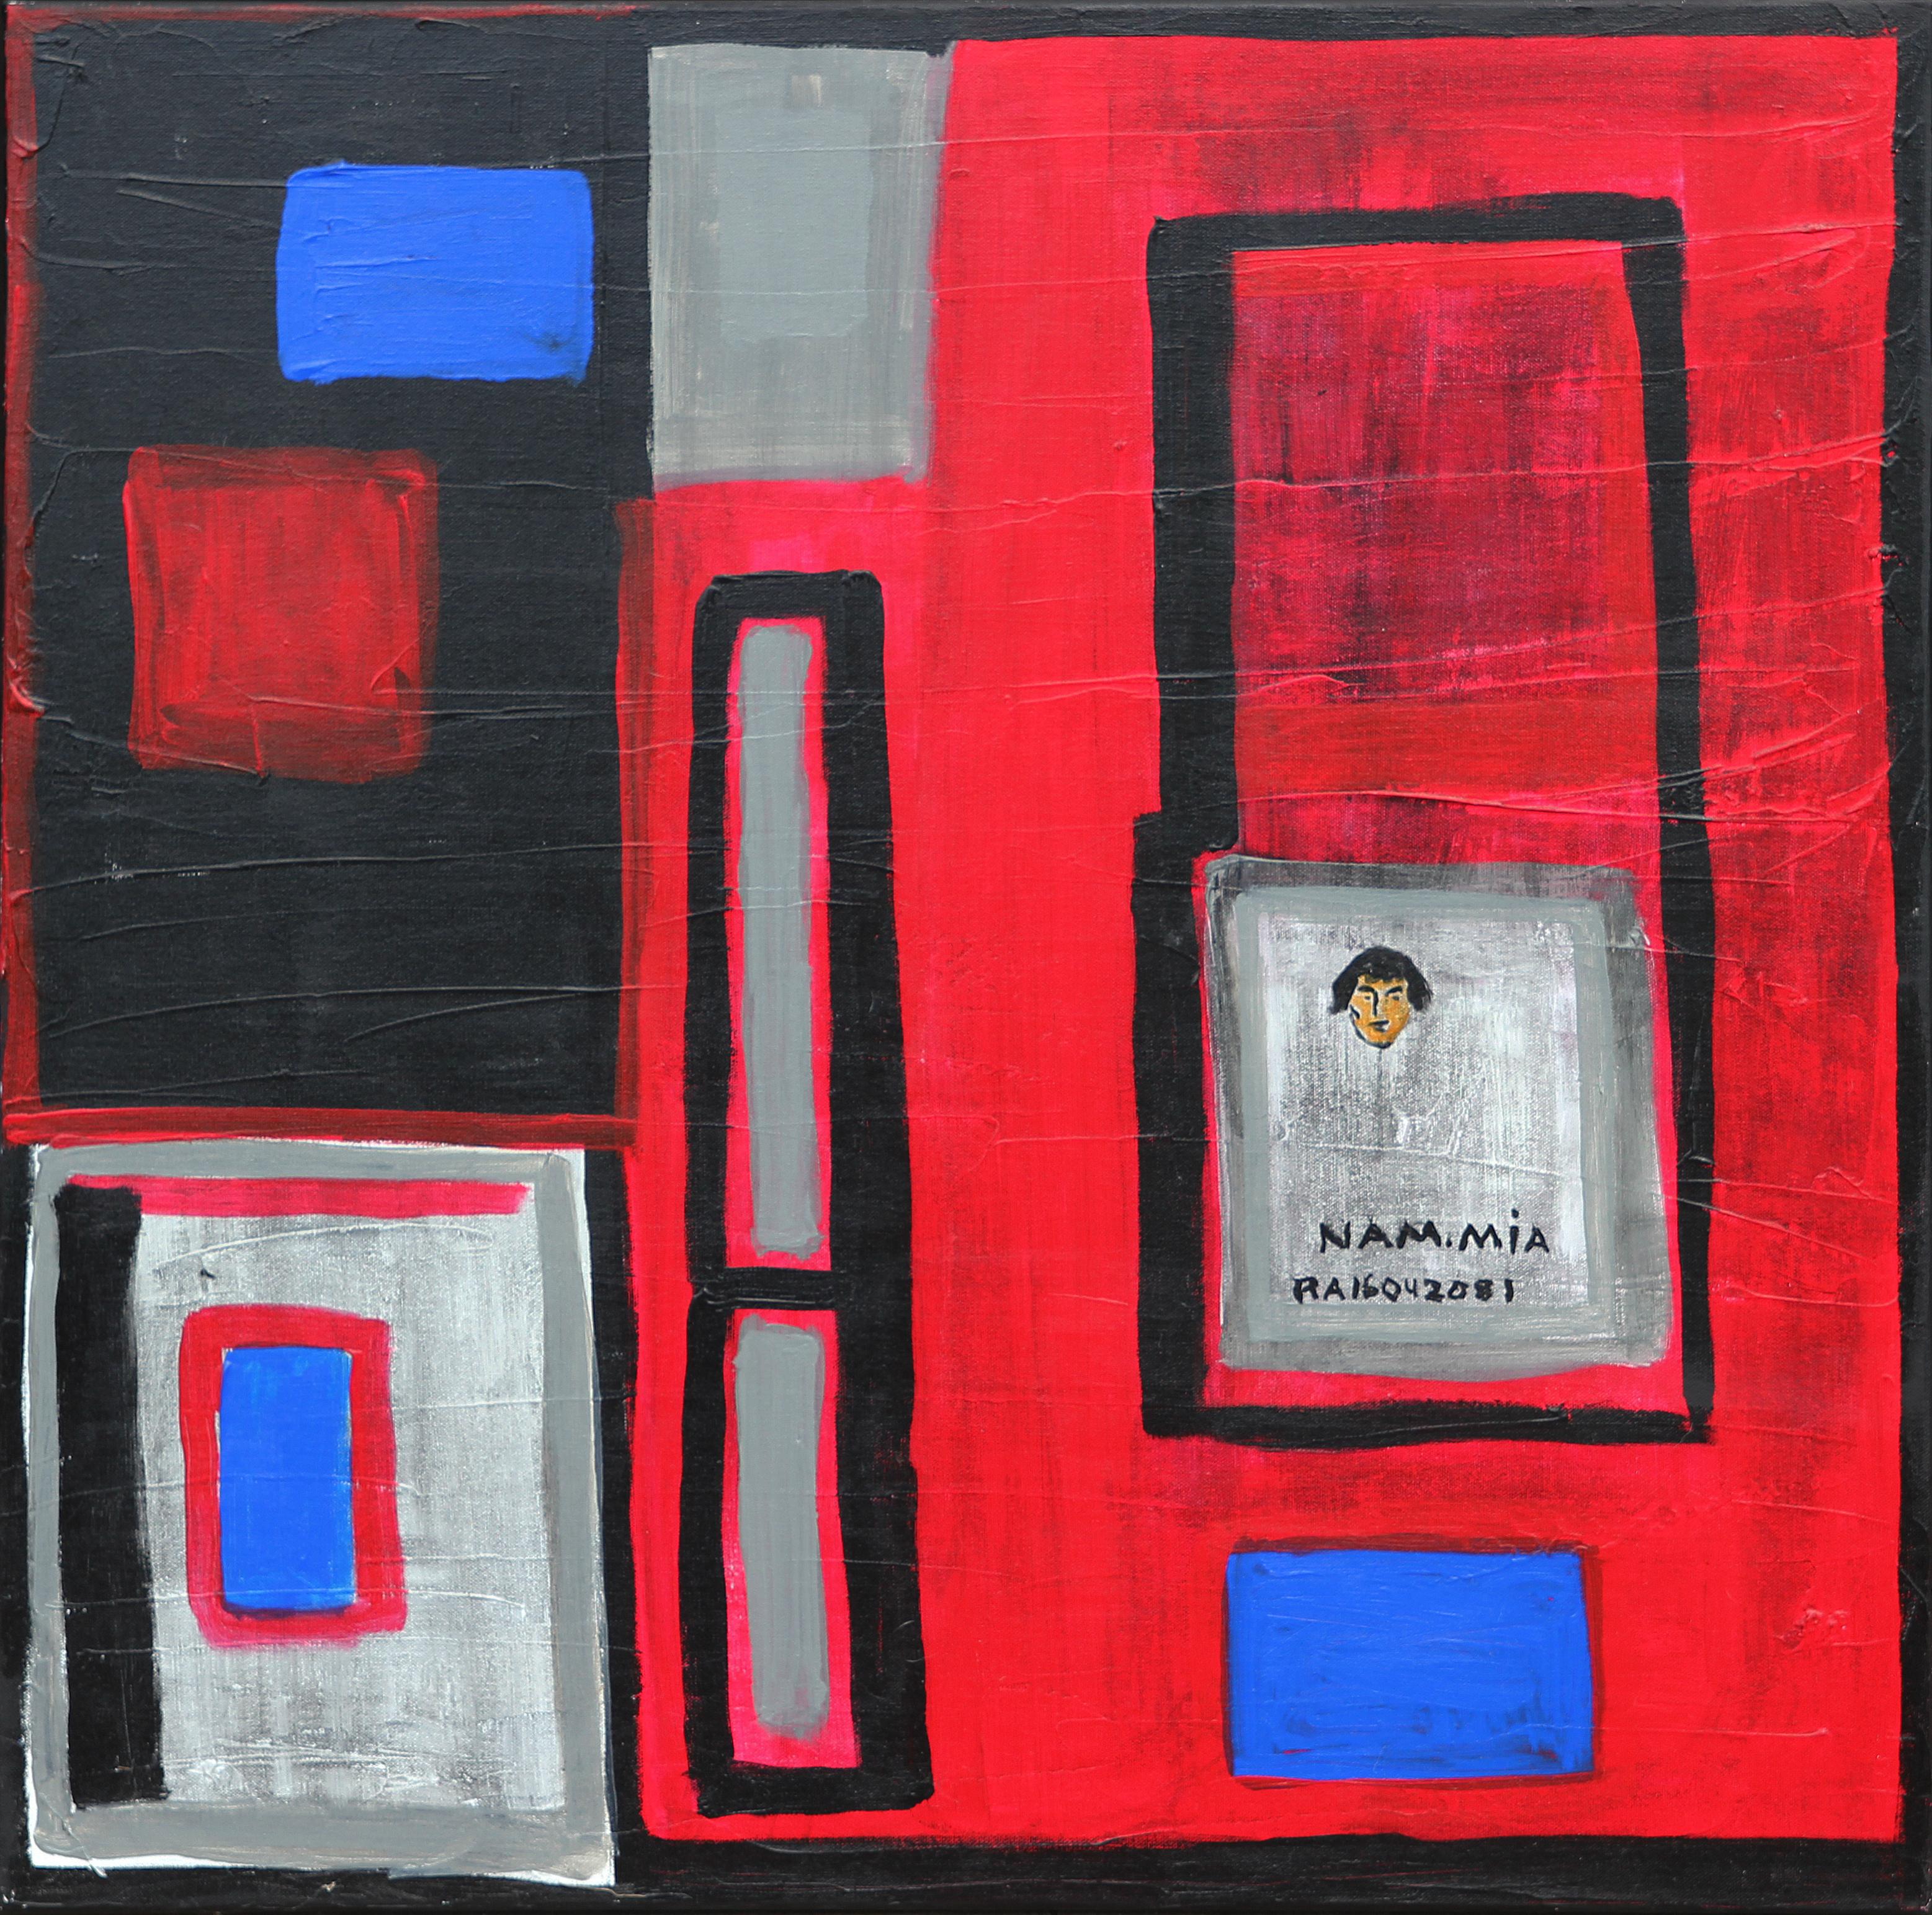 Paul Reeves Figurative Painting - "MIA Vietnam" Red, Blue, and Black Figurative Geometric Abstract Painting